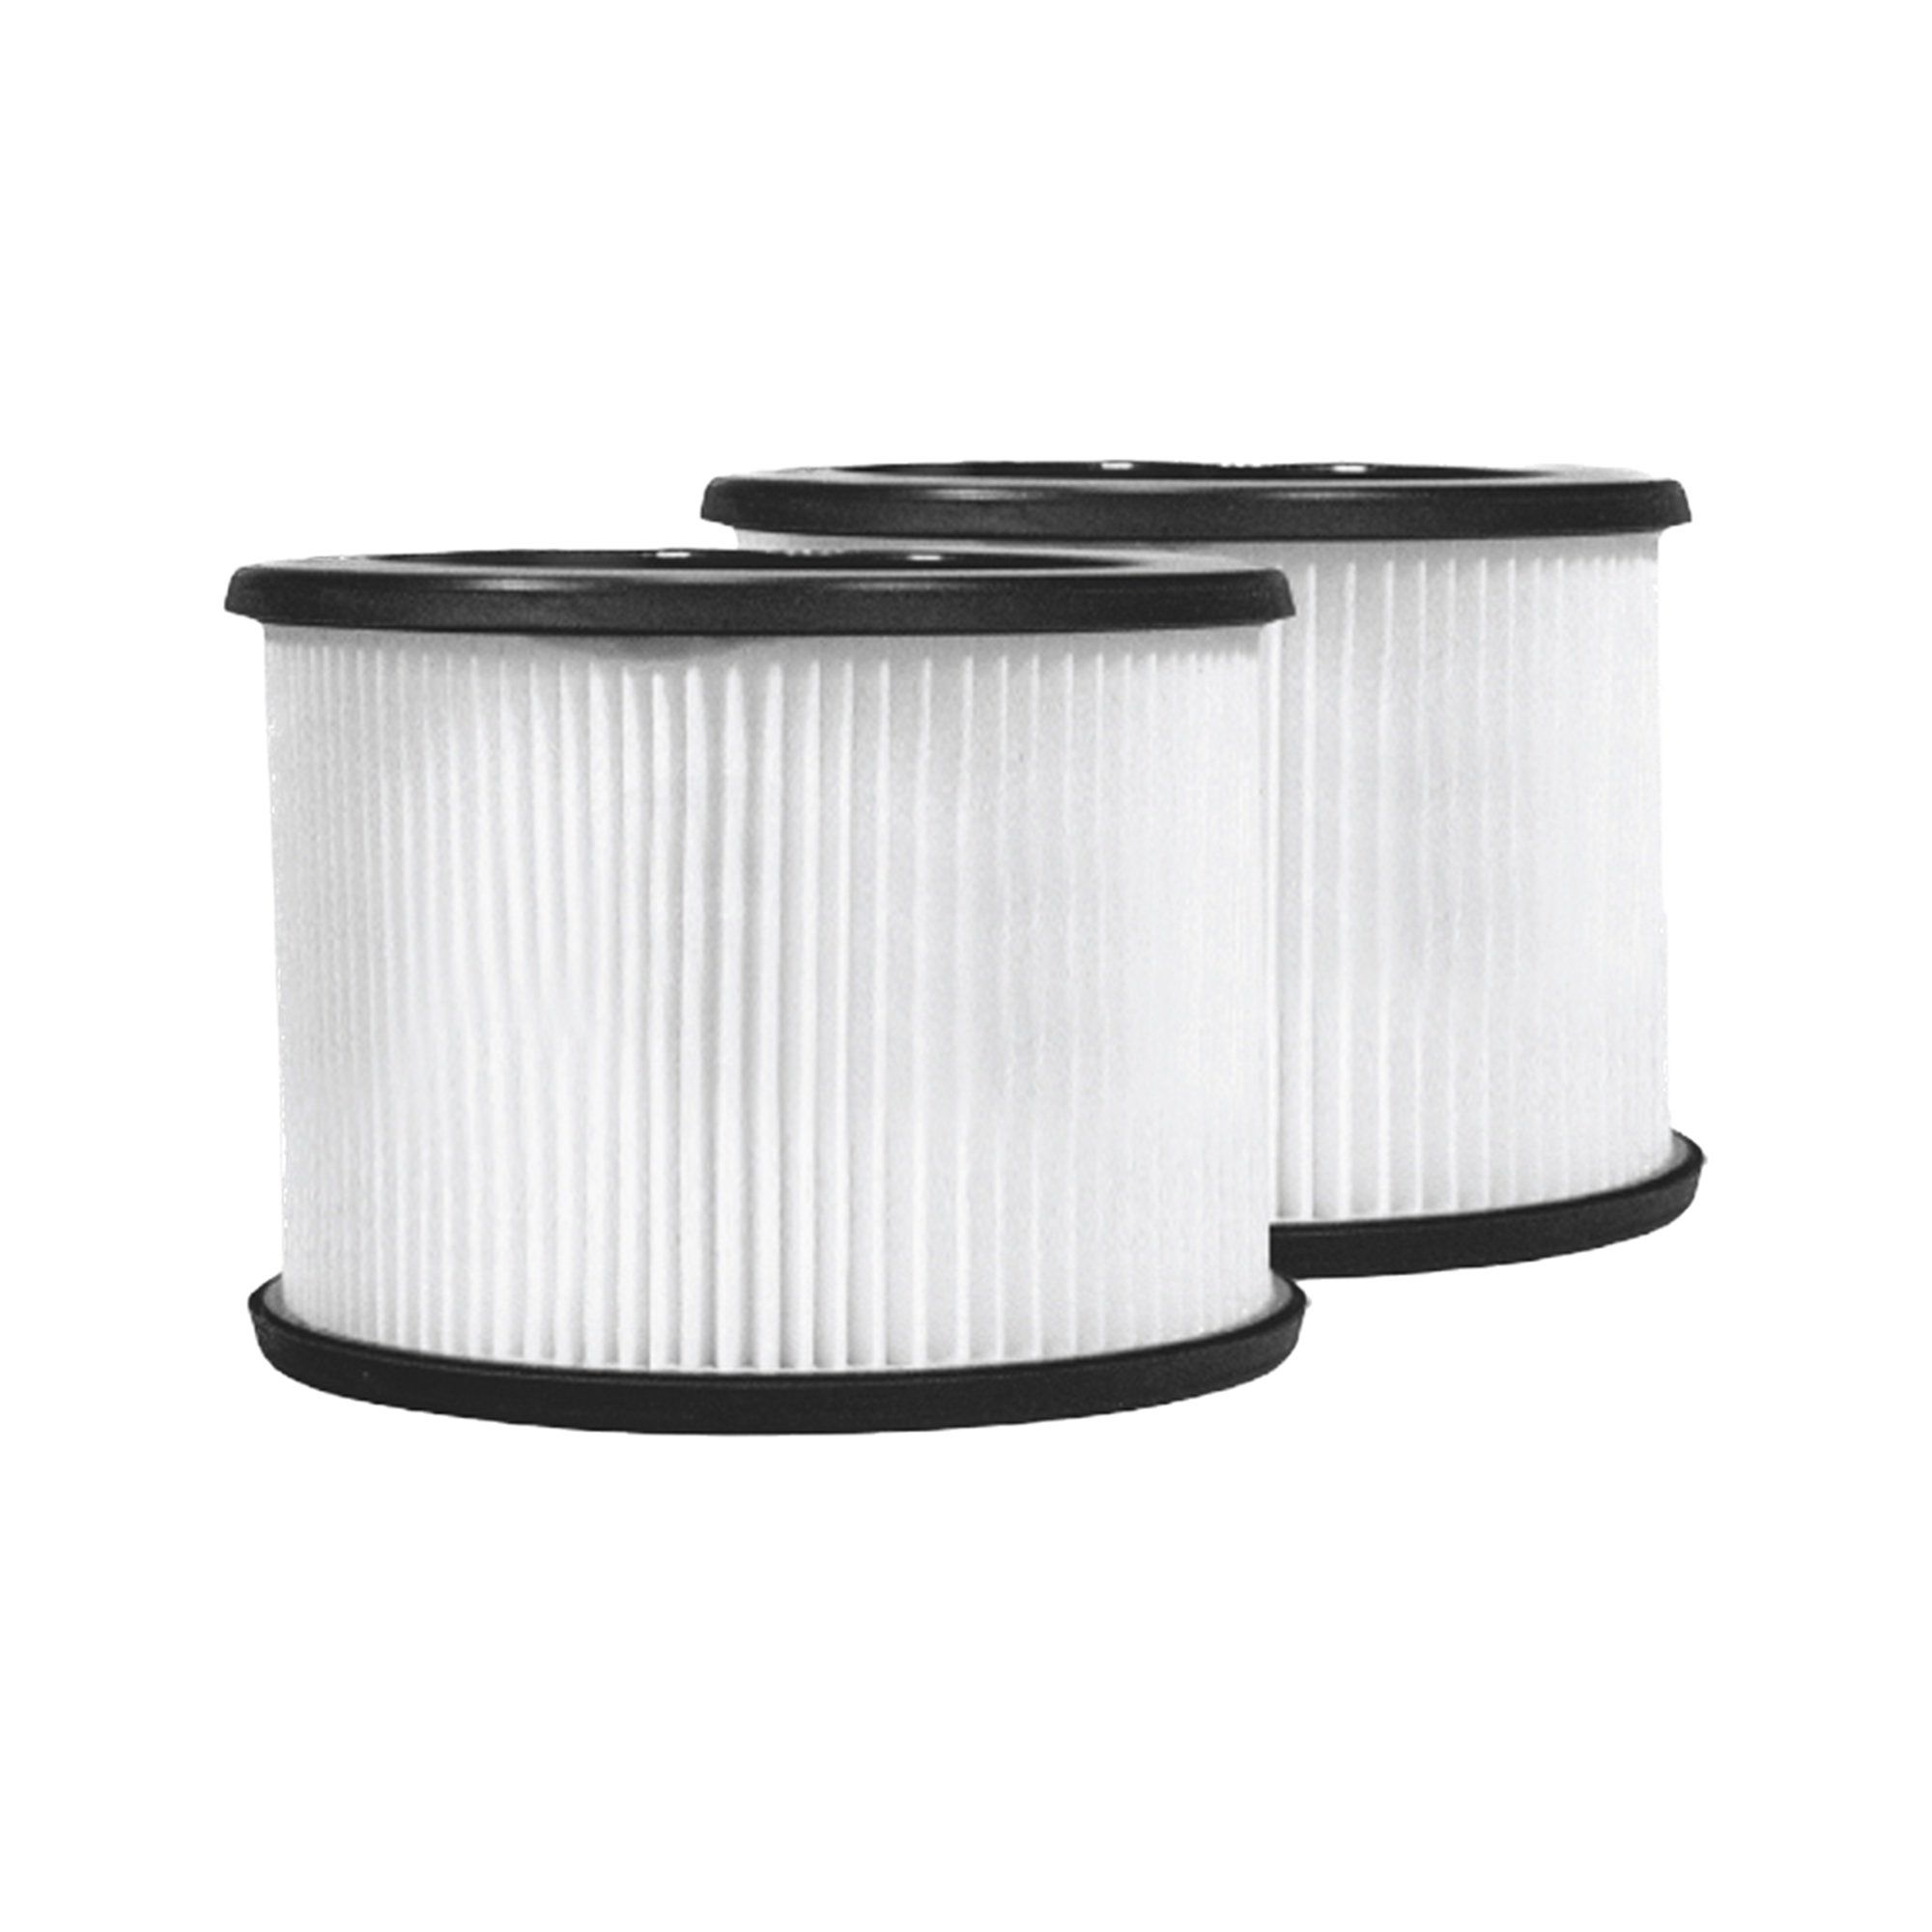 Vio® Air Purifier Replacement Filter - 2 Filters